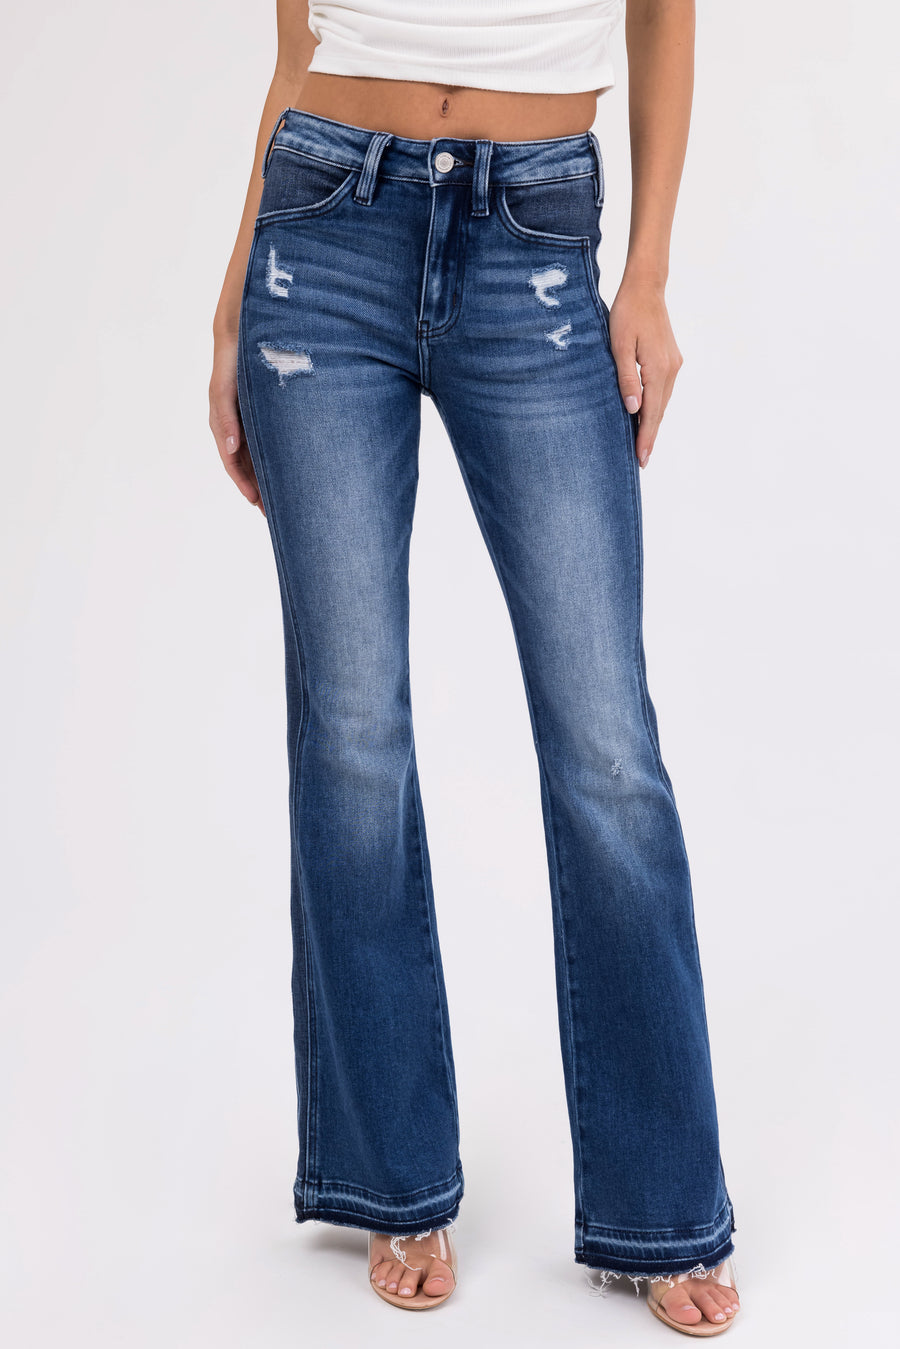 KanCan Dark Washed Double Seam Flare Jeans